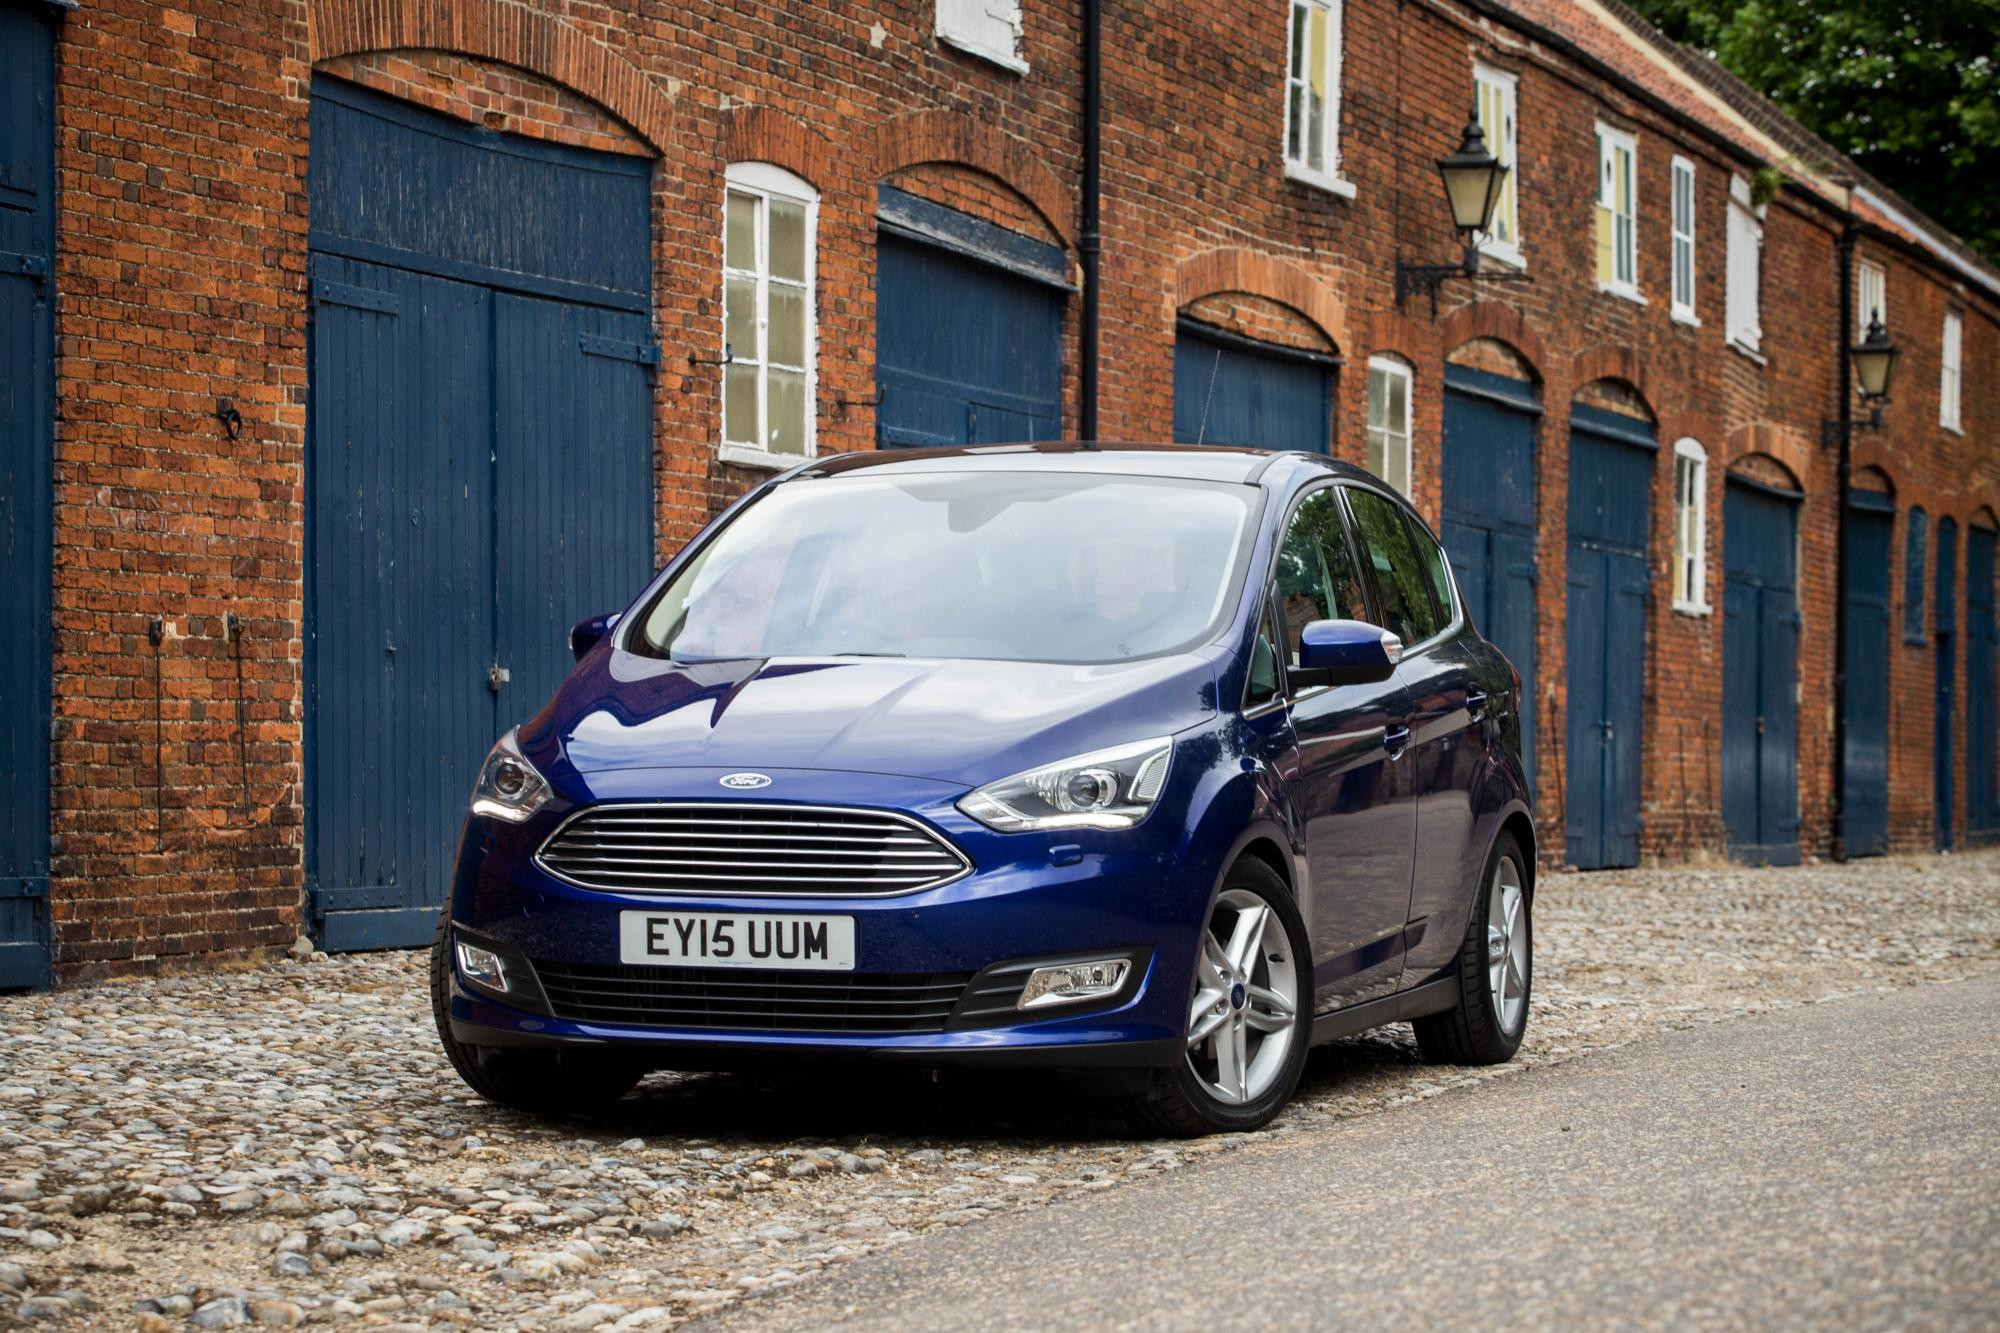 Blue Ford C-Max parked facing front on a cobbled street in front of a row of workshops